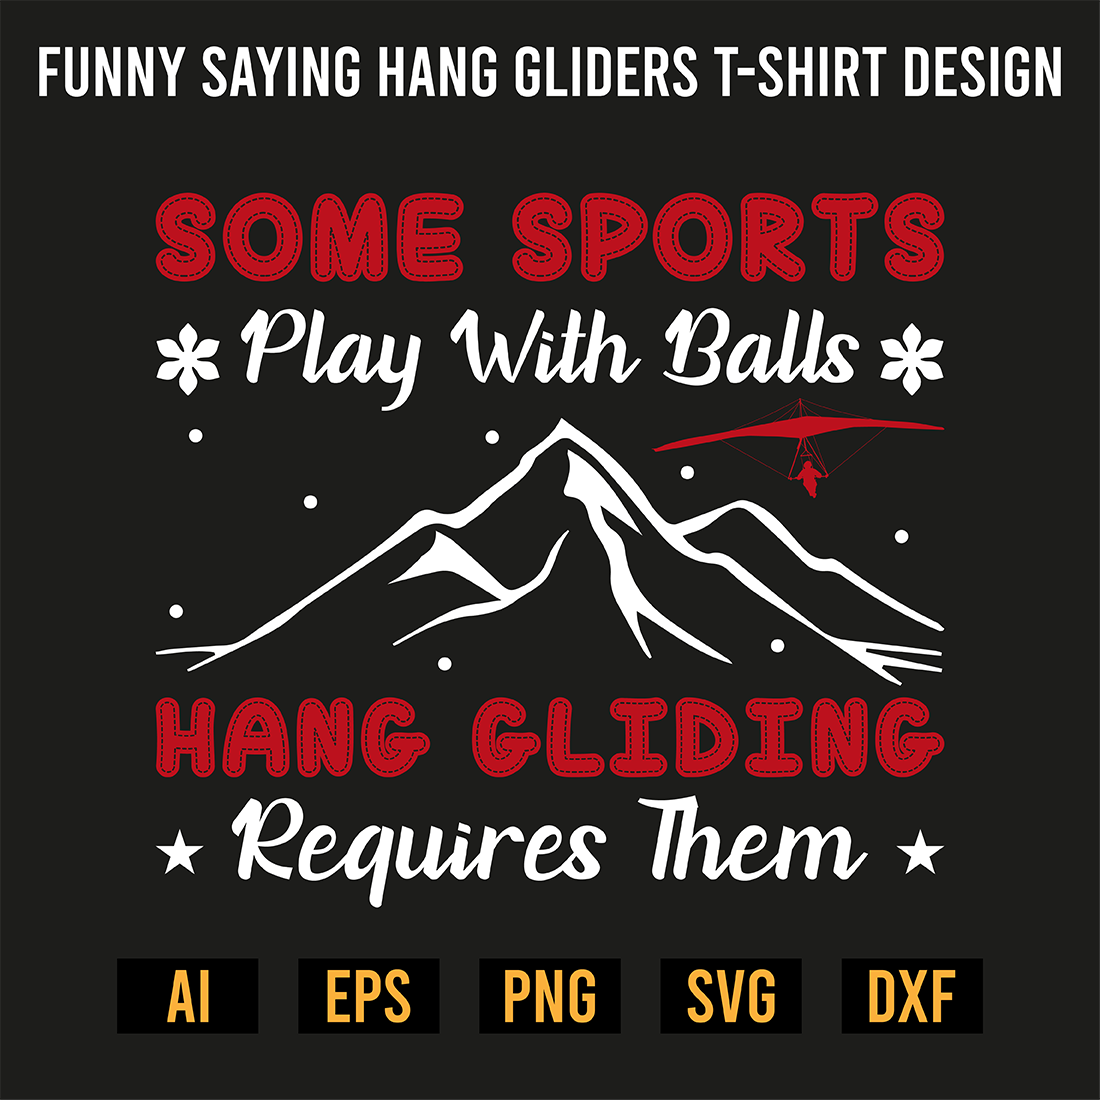 Funny Saying Hang Gliders T-Shirt Design preview image.